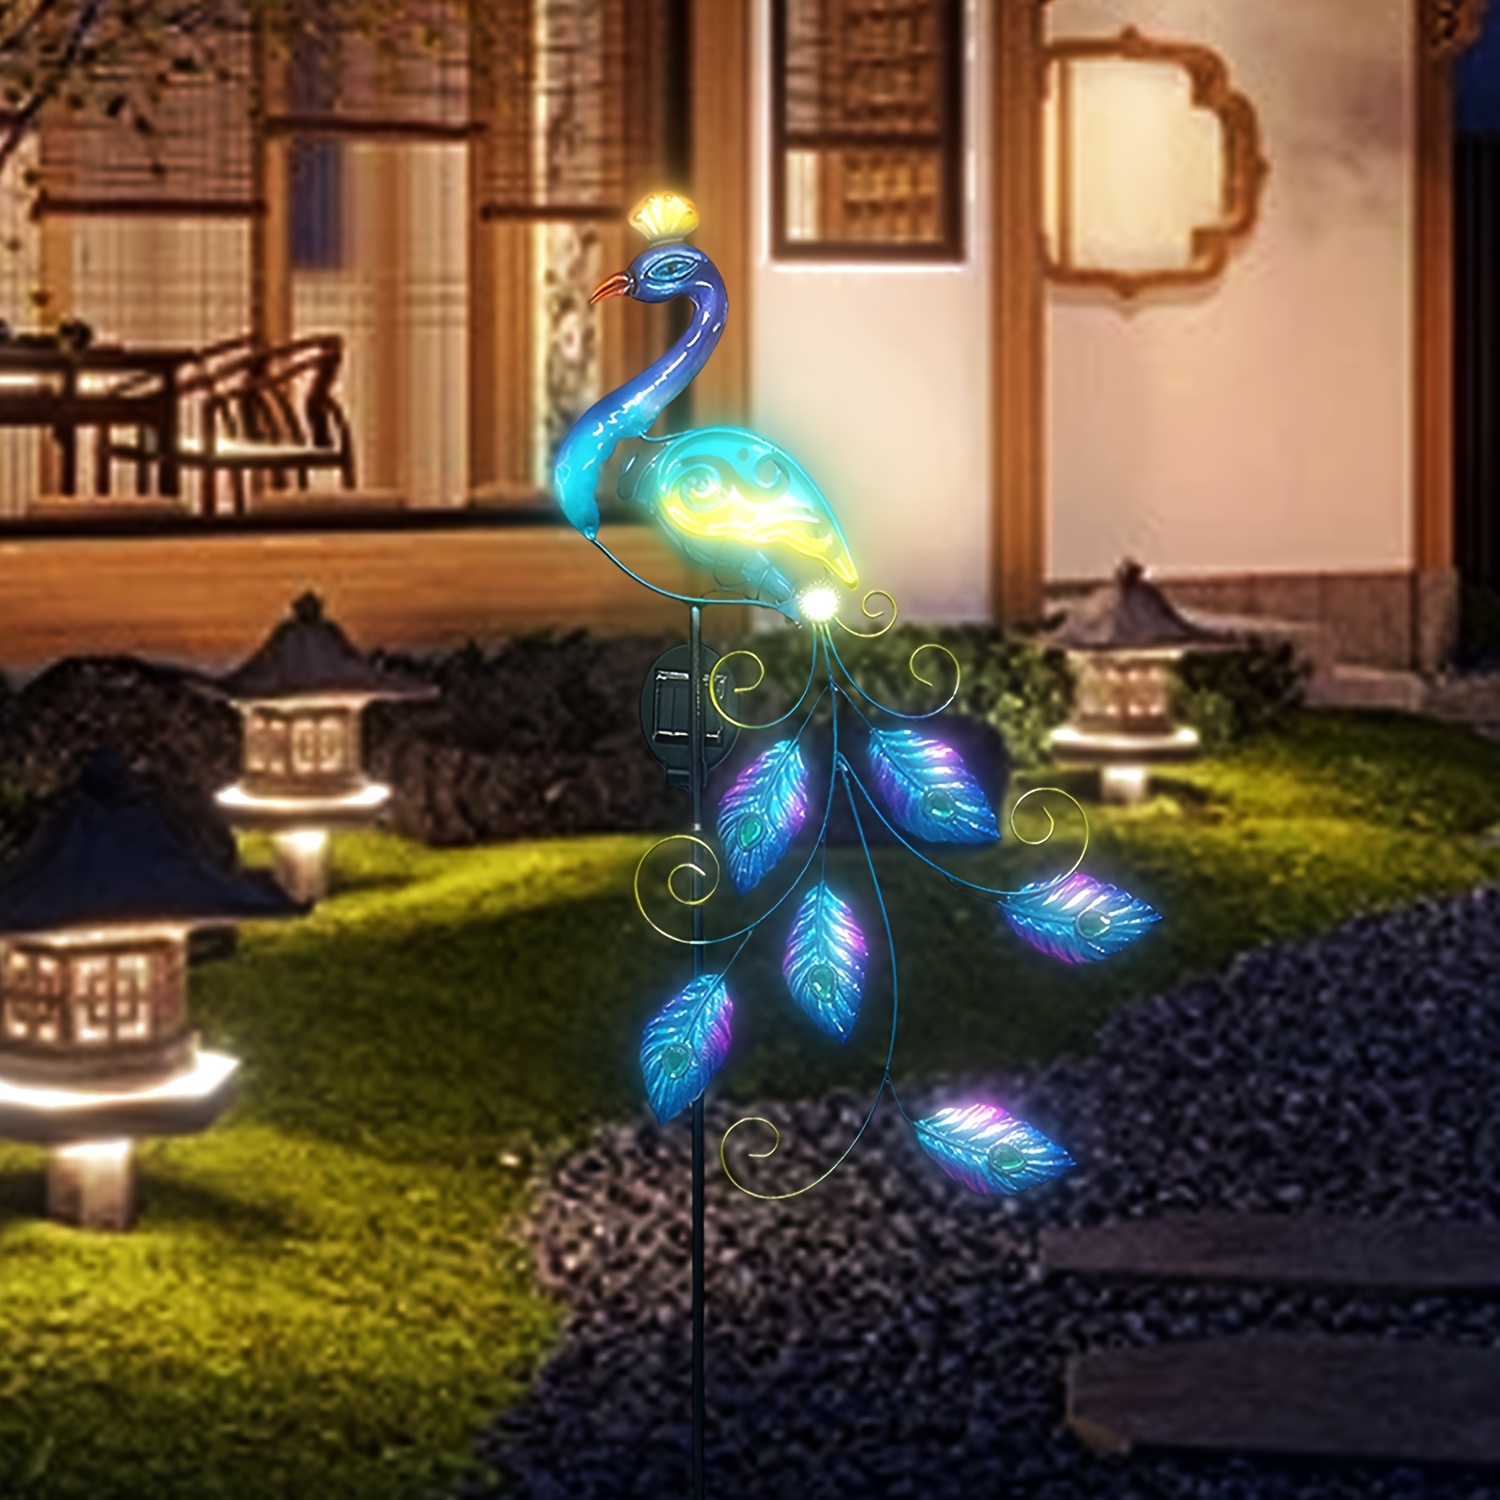 

1pc Solar-powered Peacock Statue Light, Iron Art Outdoor Yard Lamp, Landscape Lighting, Garden Lawn Decor, Glowing Metal Peacock For Night Ambiance